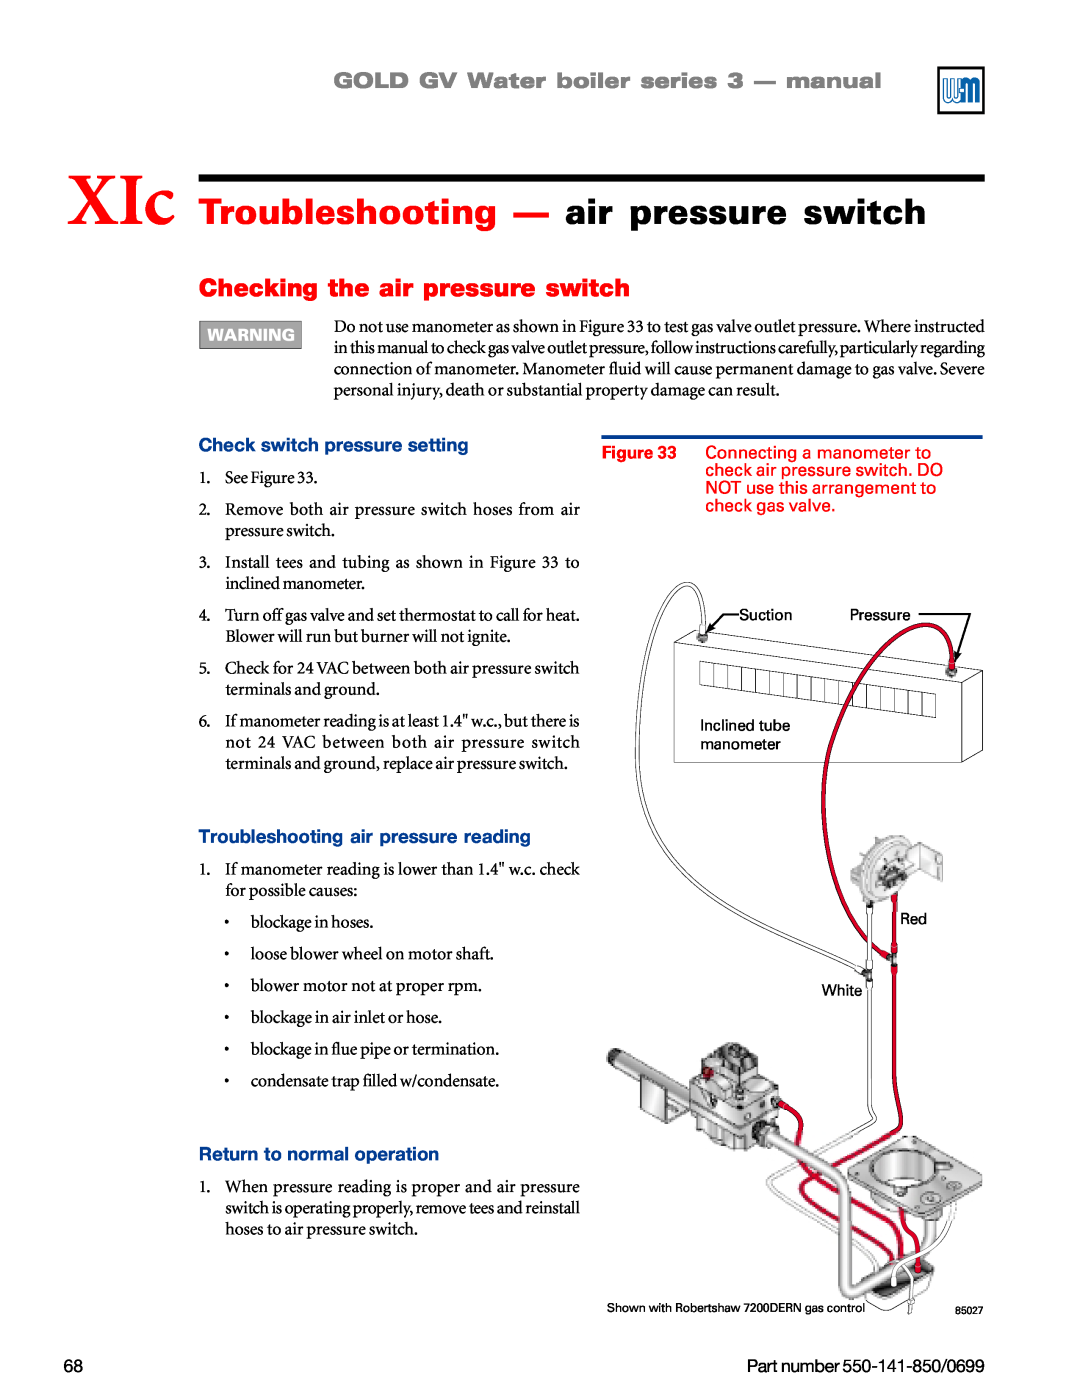 Weil-McLain GOLD DV WATER BOILER manual XIc Troubleshooting - air pressure switch, Checking the air pressure switch 